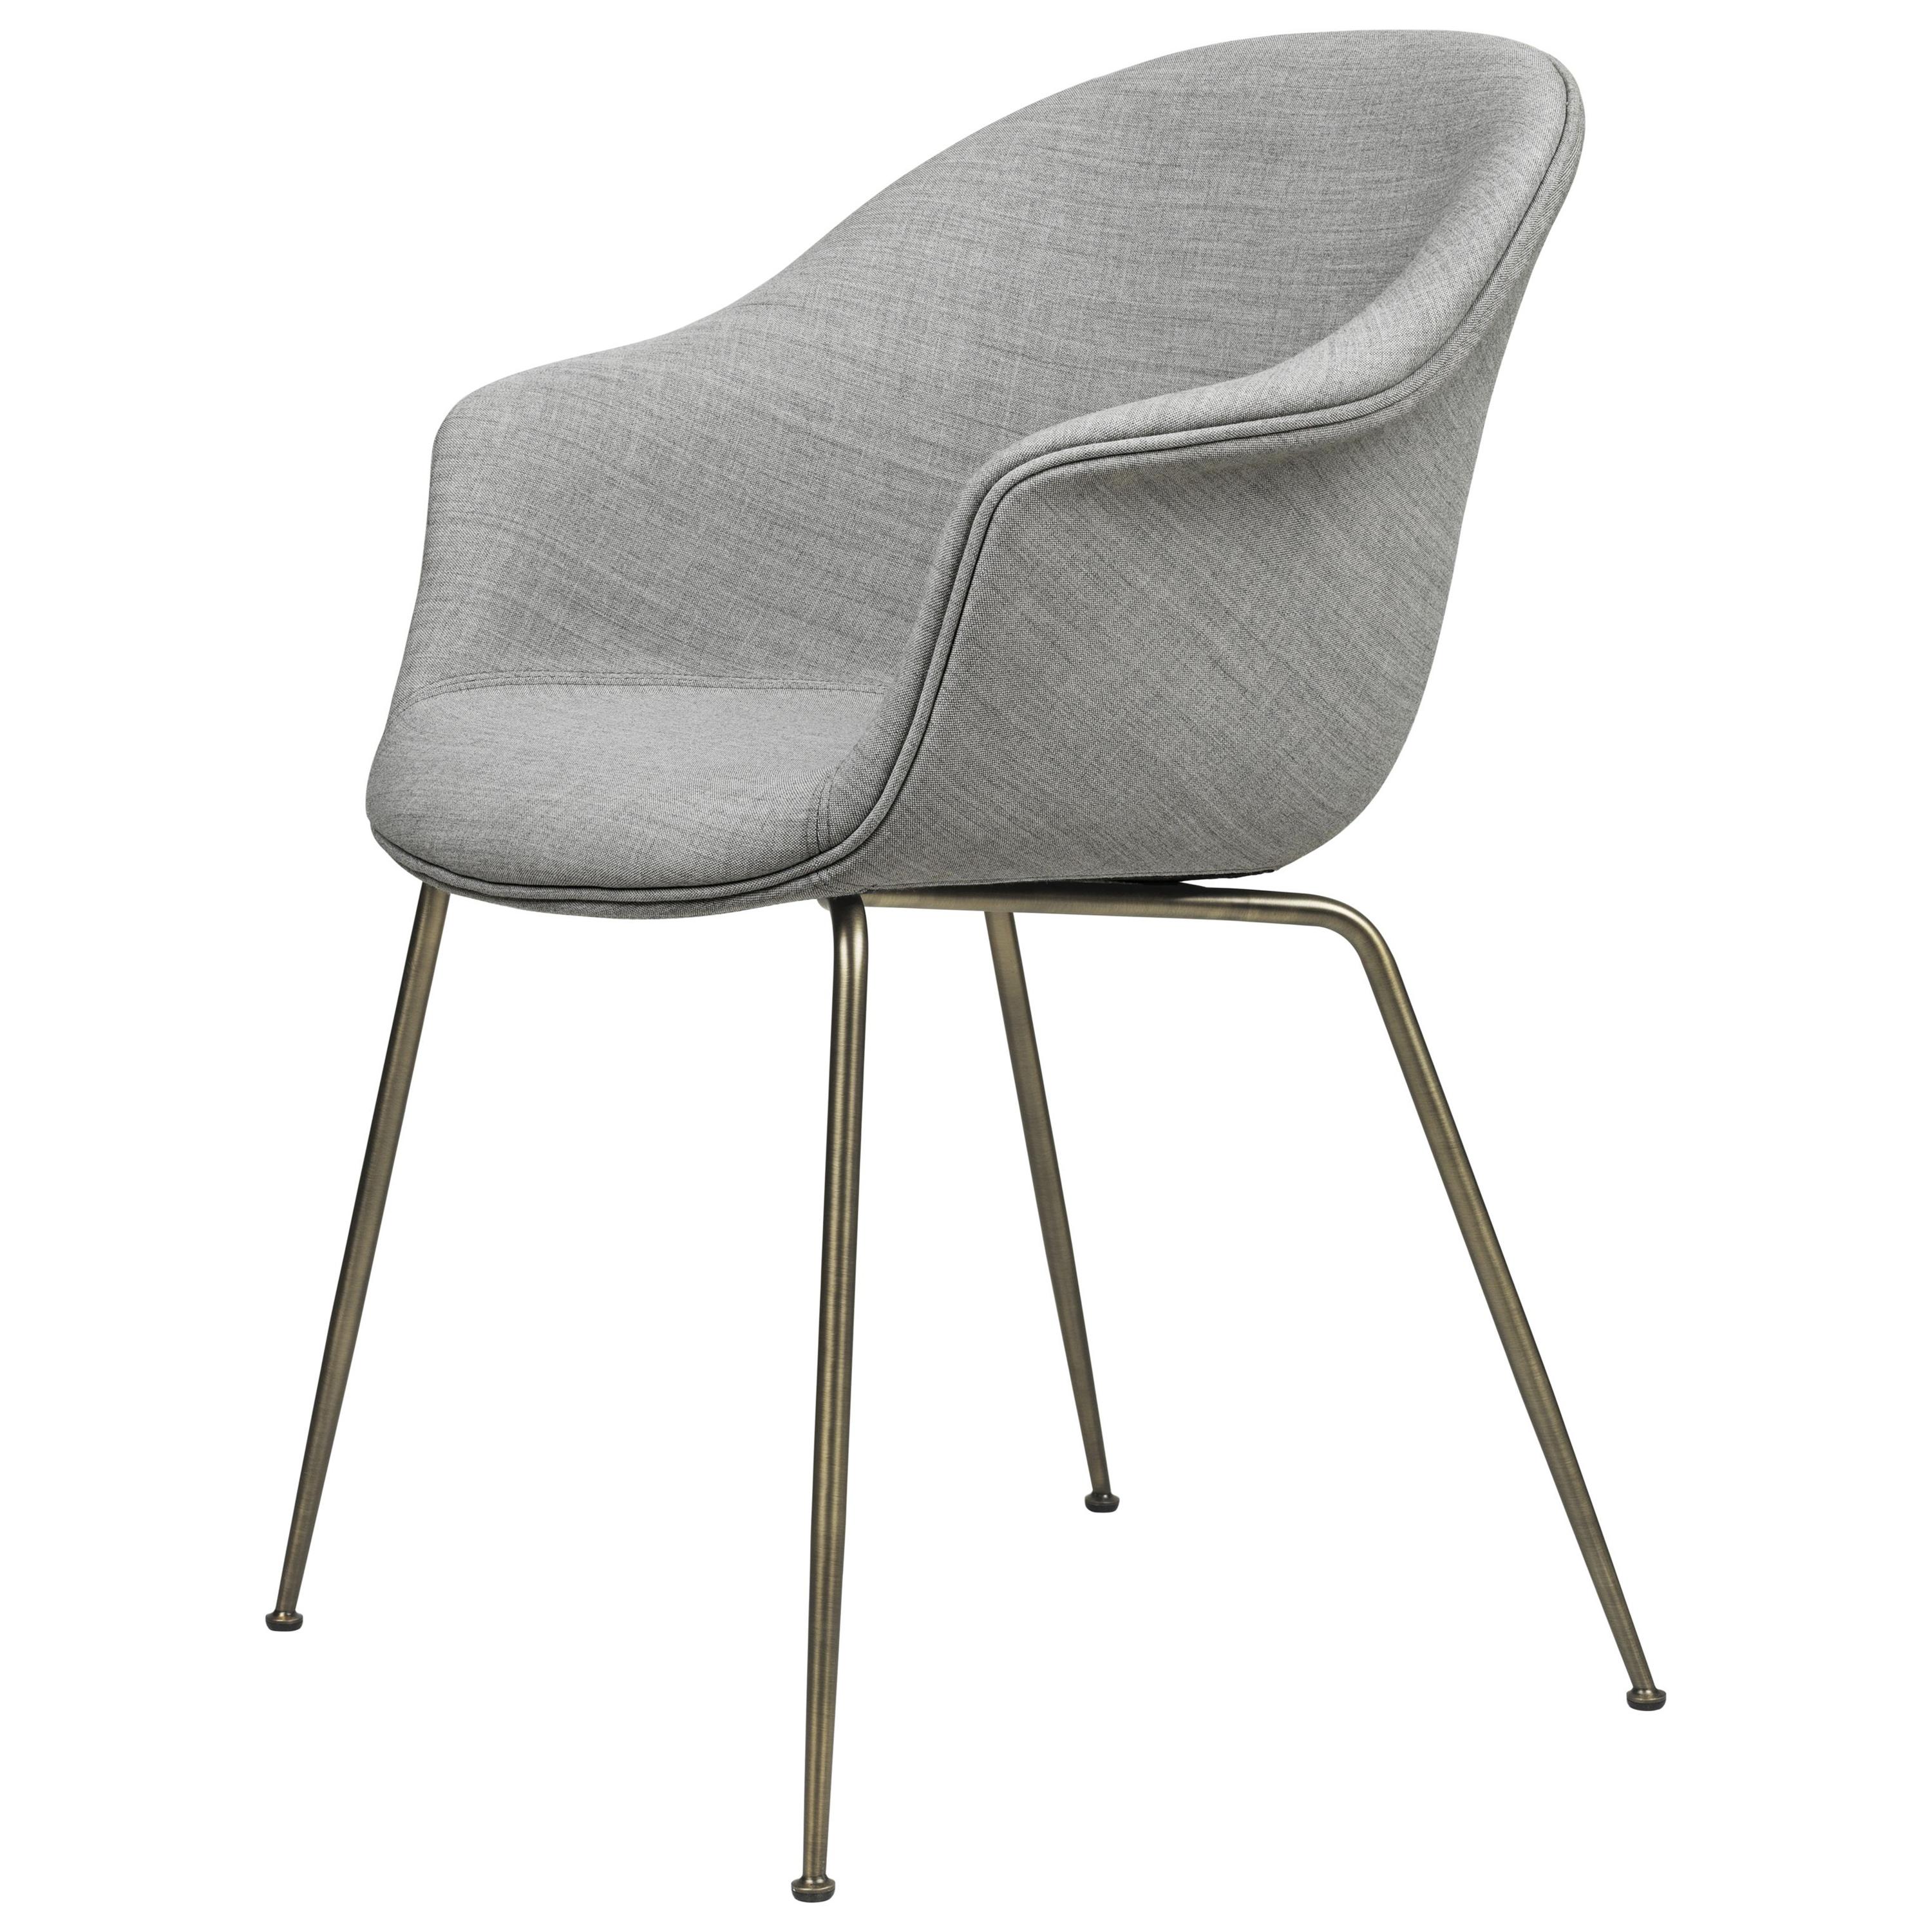 GamFratesi 'Bat' Dining Chair in Grey with Antique Brass Conic Base